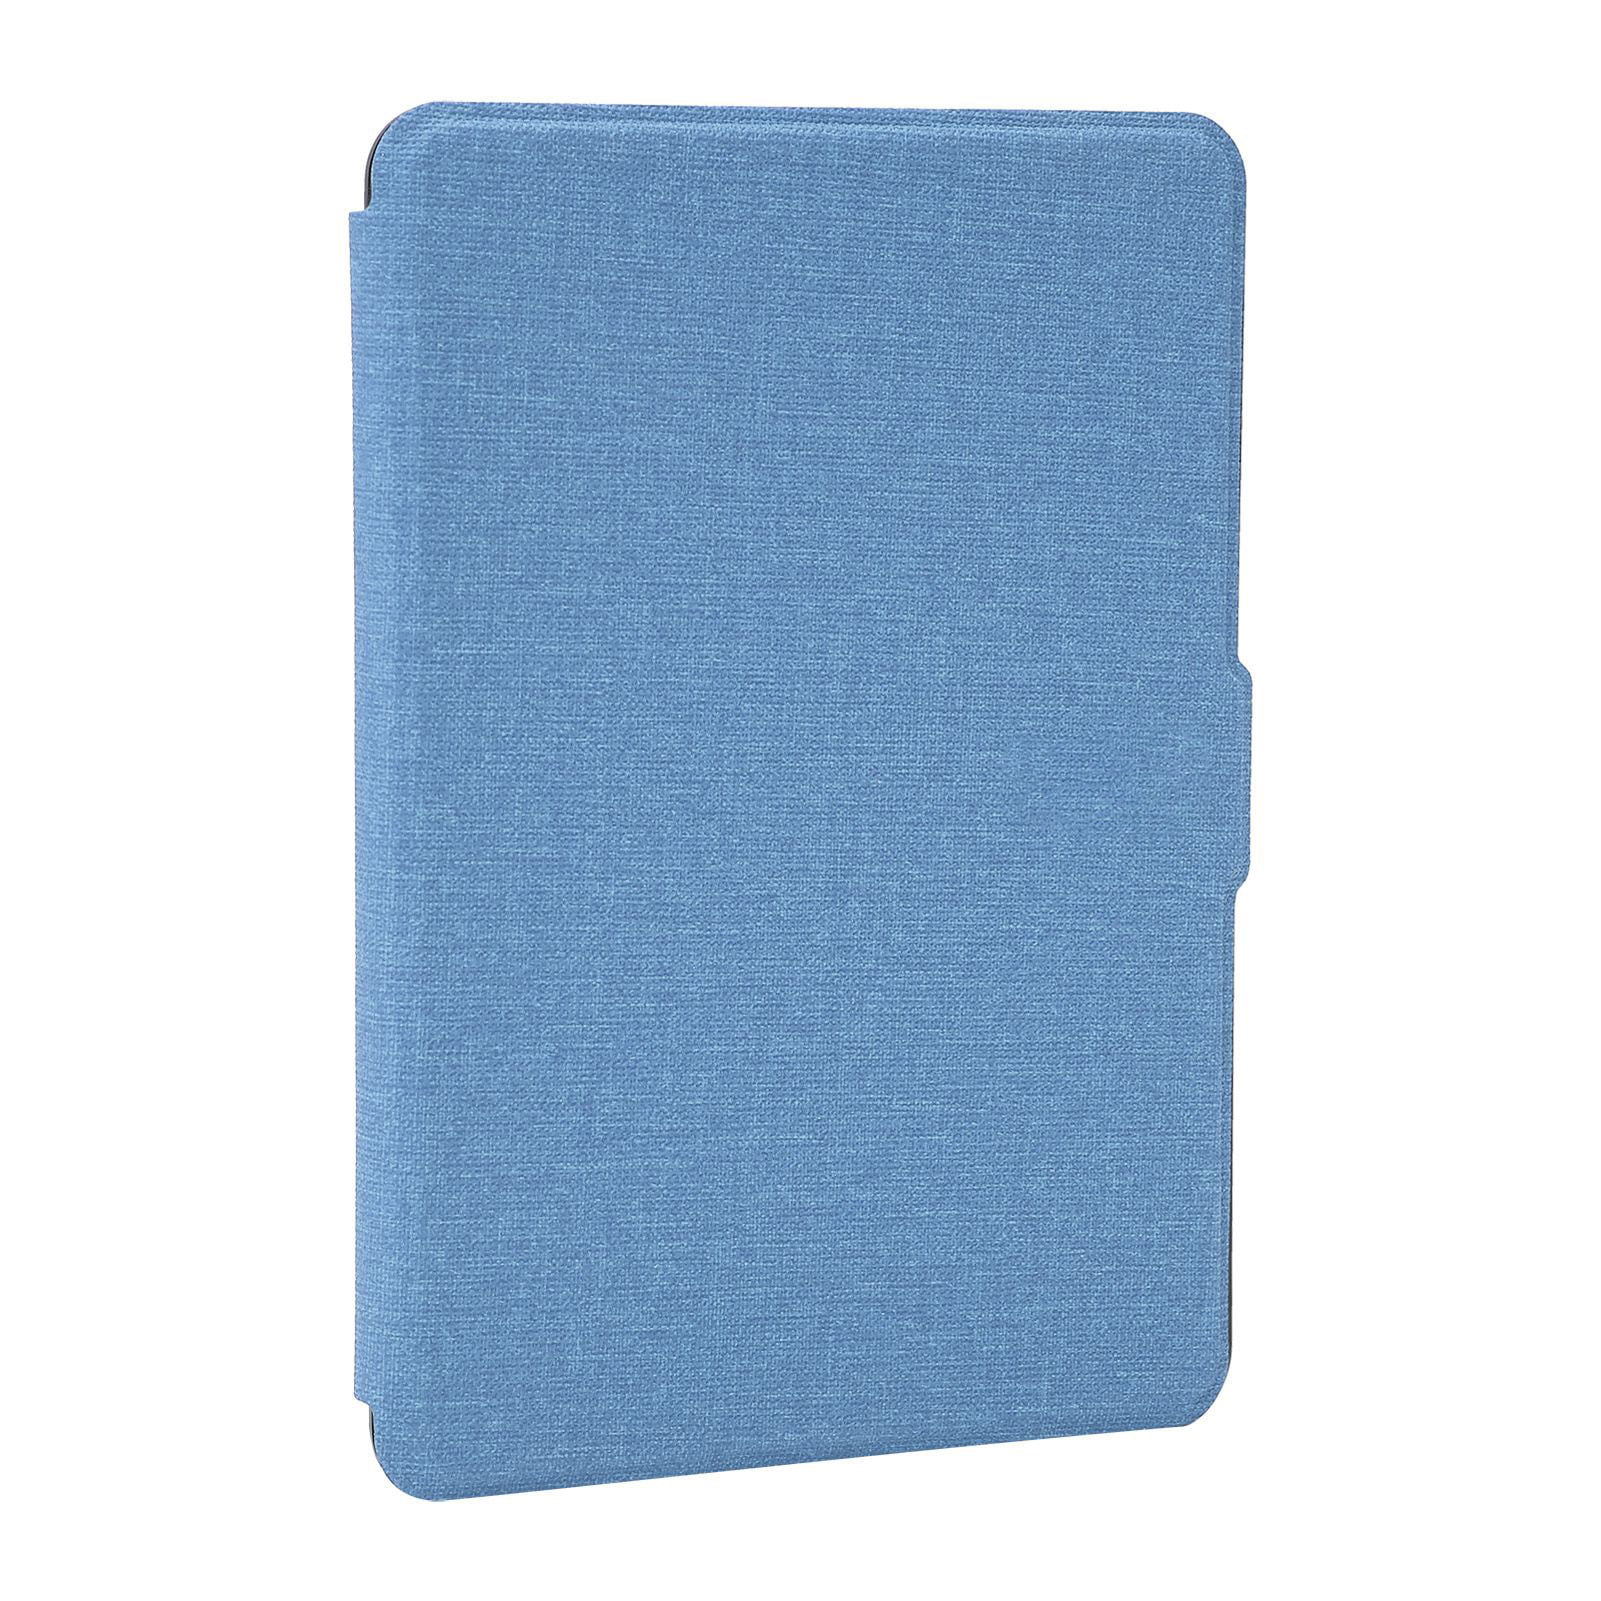 For Kindle Paperwhite Case, Power Saving Function For Kindle Paperwhite123 Dark Blue,Light Walmart.com